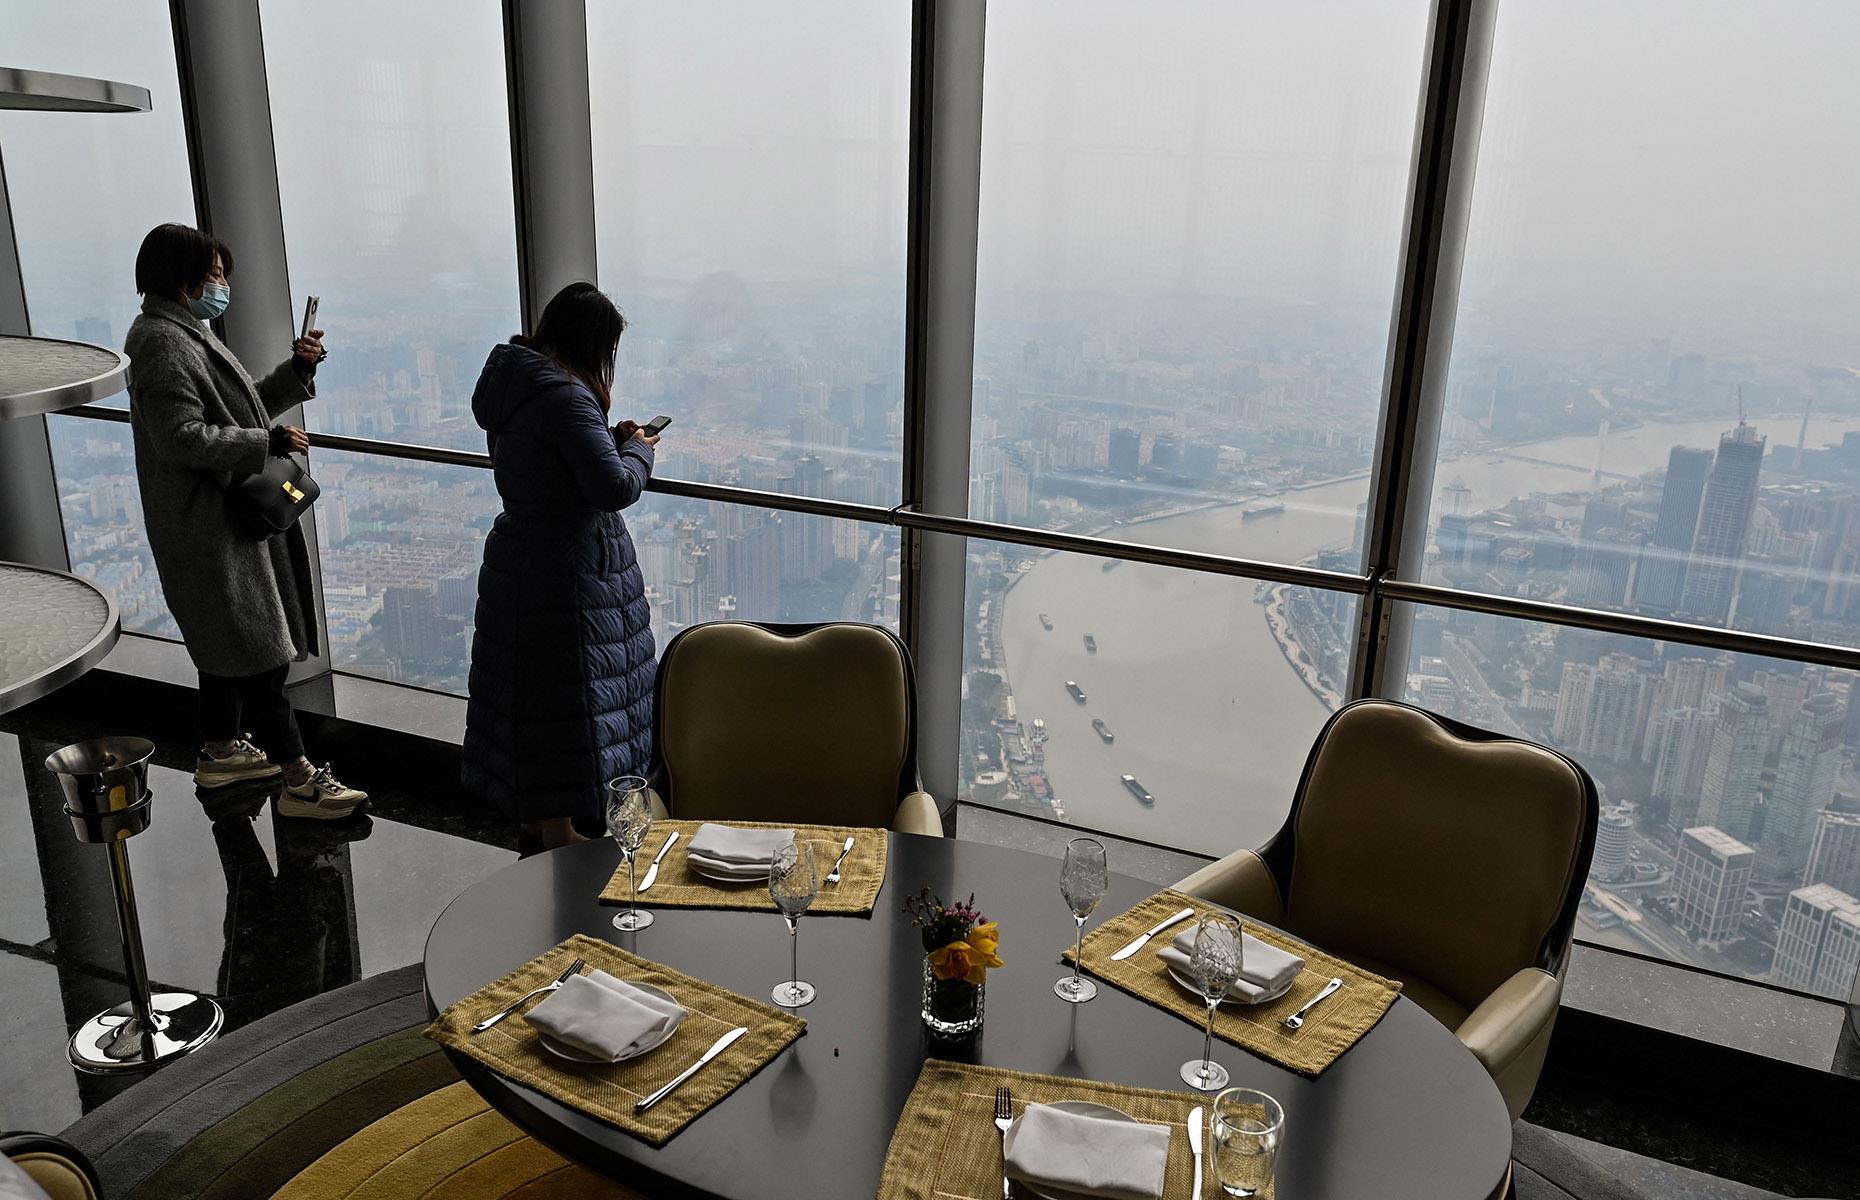 <p>Officially the world's highest restaurant in a building – as certified by Guinness World Records in 2022 – Heavenly Jin is yet another feather in the cap of the Shanghai Tower. The ultra-high-end eatery is part of J Hotel and is found on the 120th floor, notching a height of 1,824 feet. That's 350 feet more than previous record holder At.mosphere, which sits on the 122nd floor of the world's tallest building, the Burj Khalifa.</p>